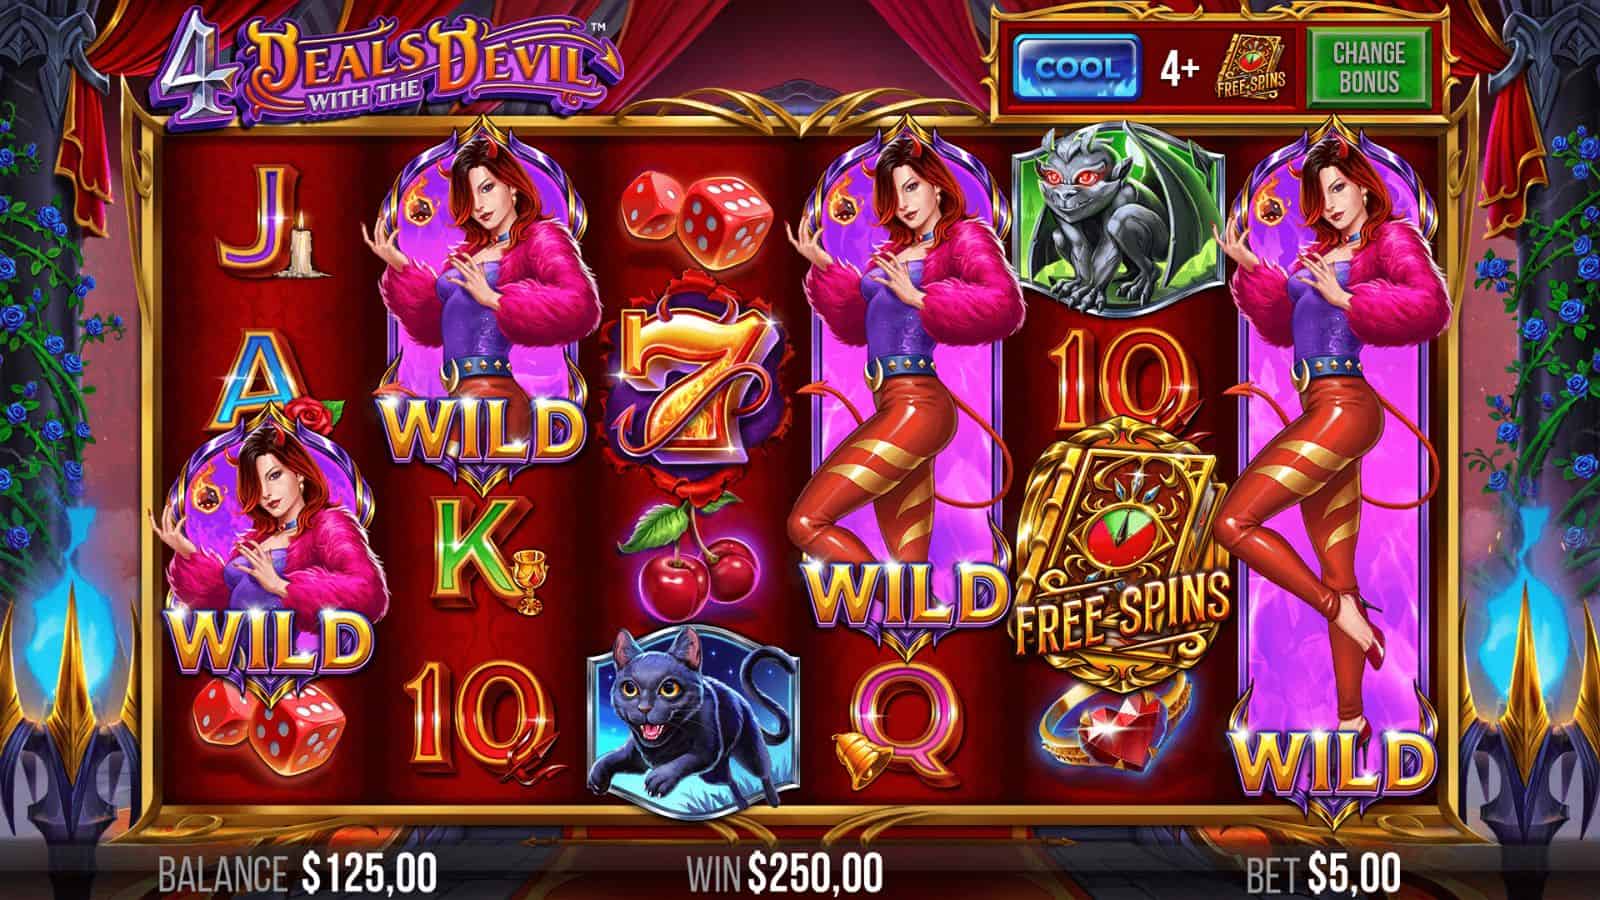 Deals with the Devil Slot 4theplayer